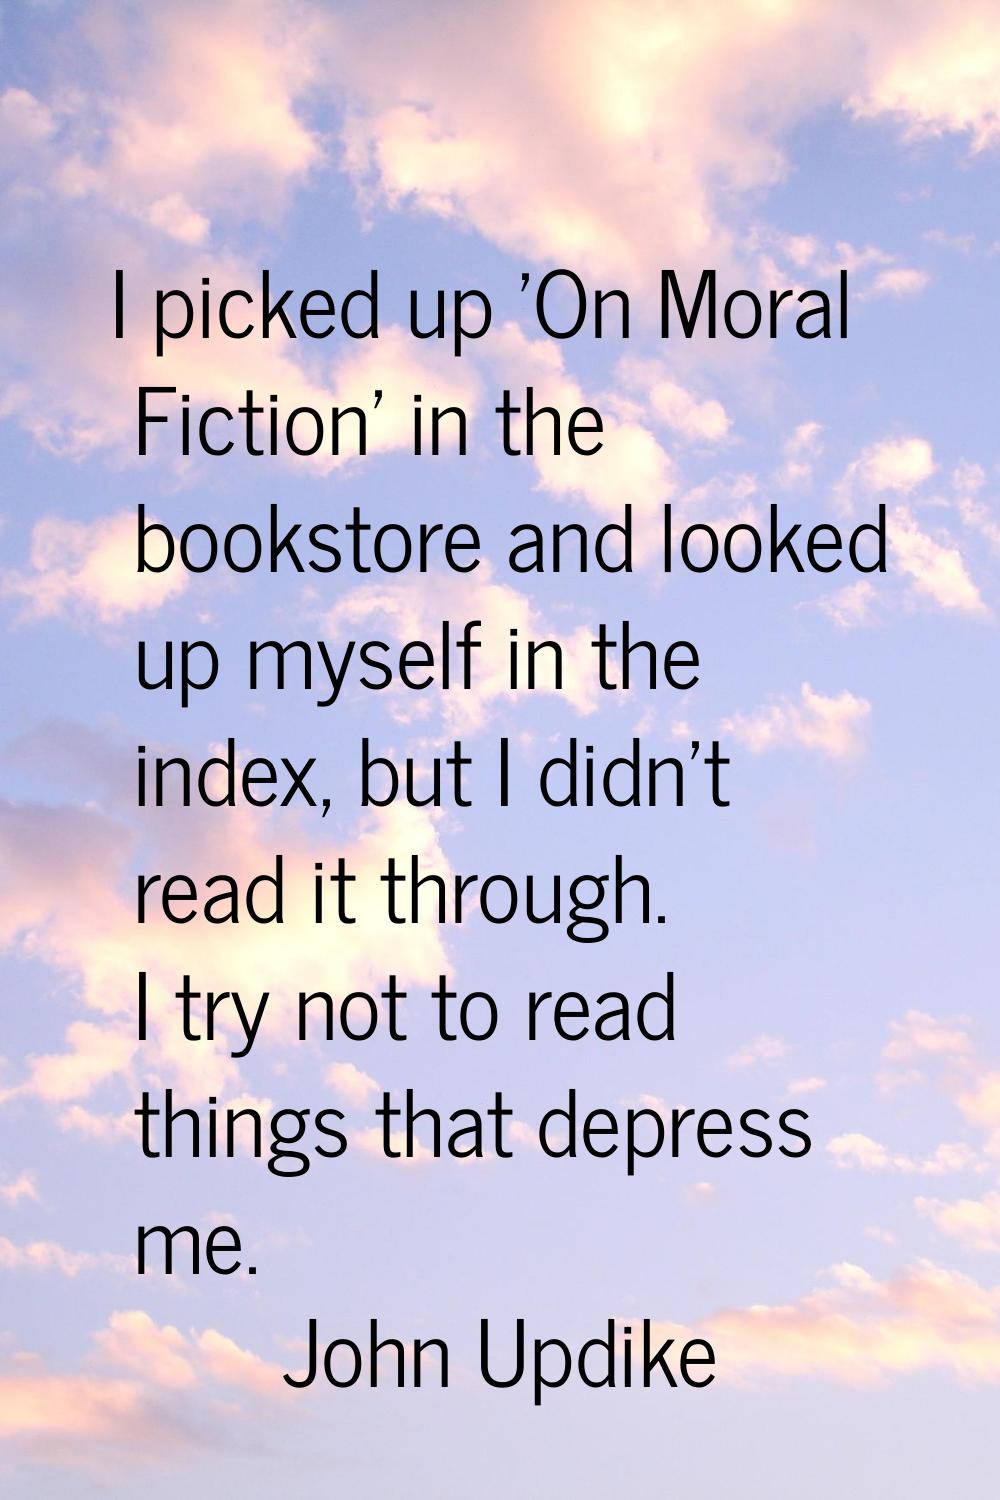 I picked up 'On Moral Fiction' in the bookstore and looked up myself in the index, but I didn't rea